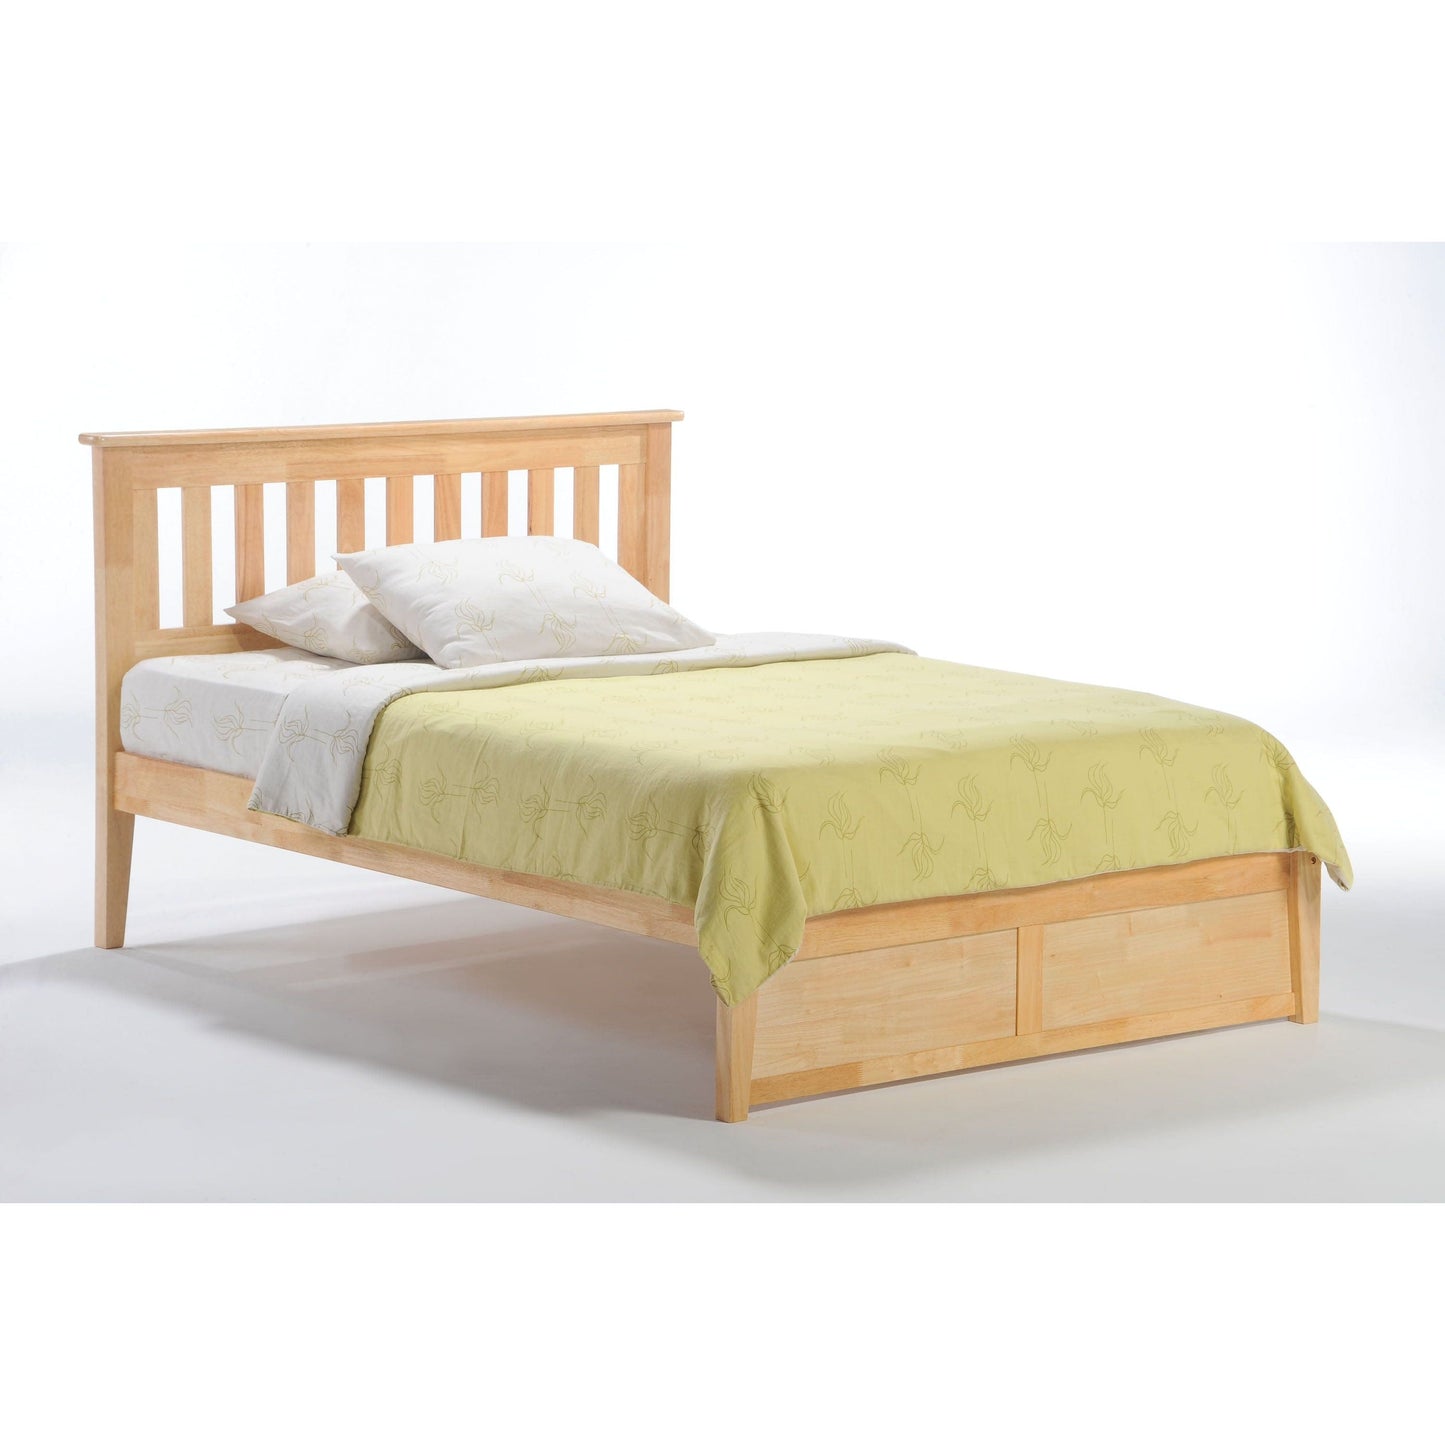 Night And Day Full Rosemary Bed (P Series) in cherry finish